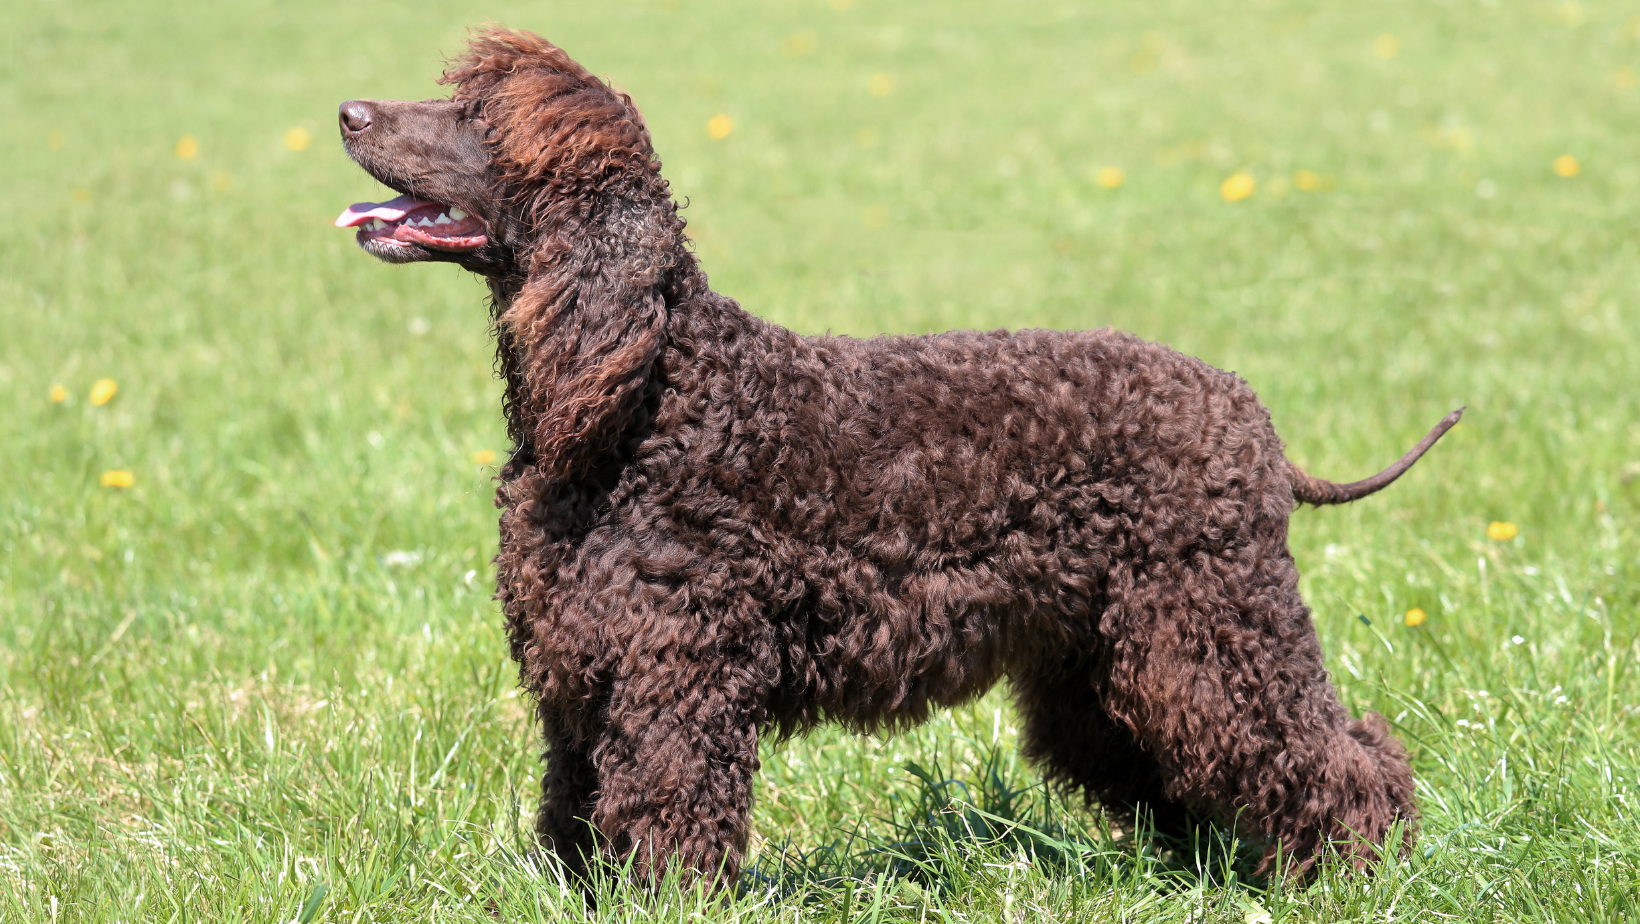 Irish Water Spaniel brown curly haired dog breed